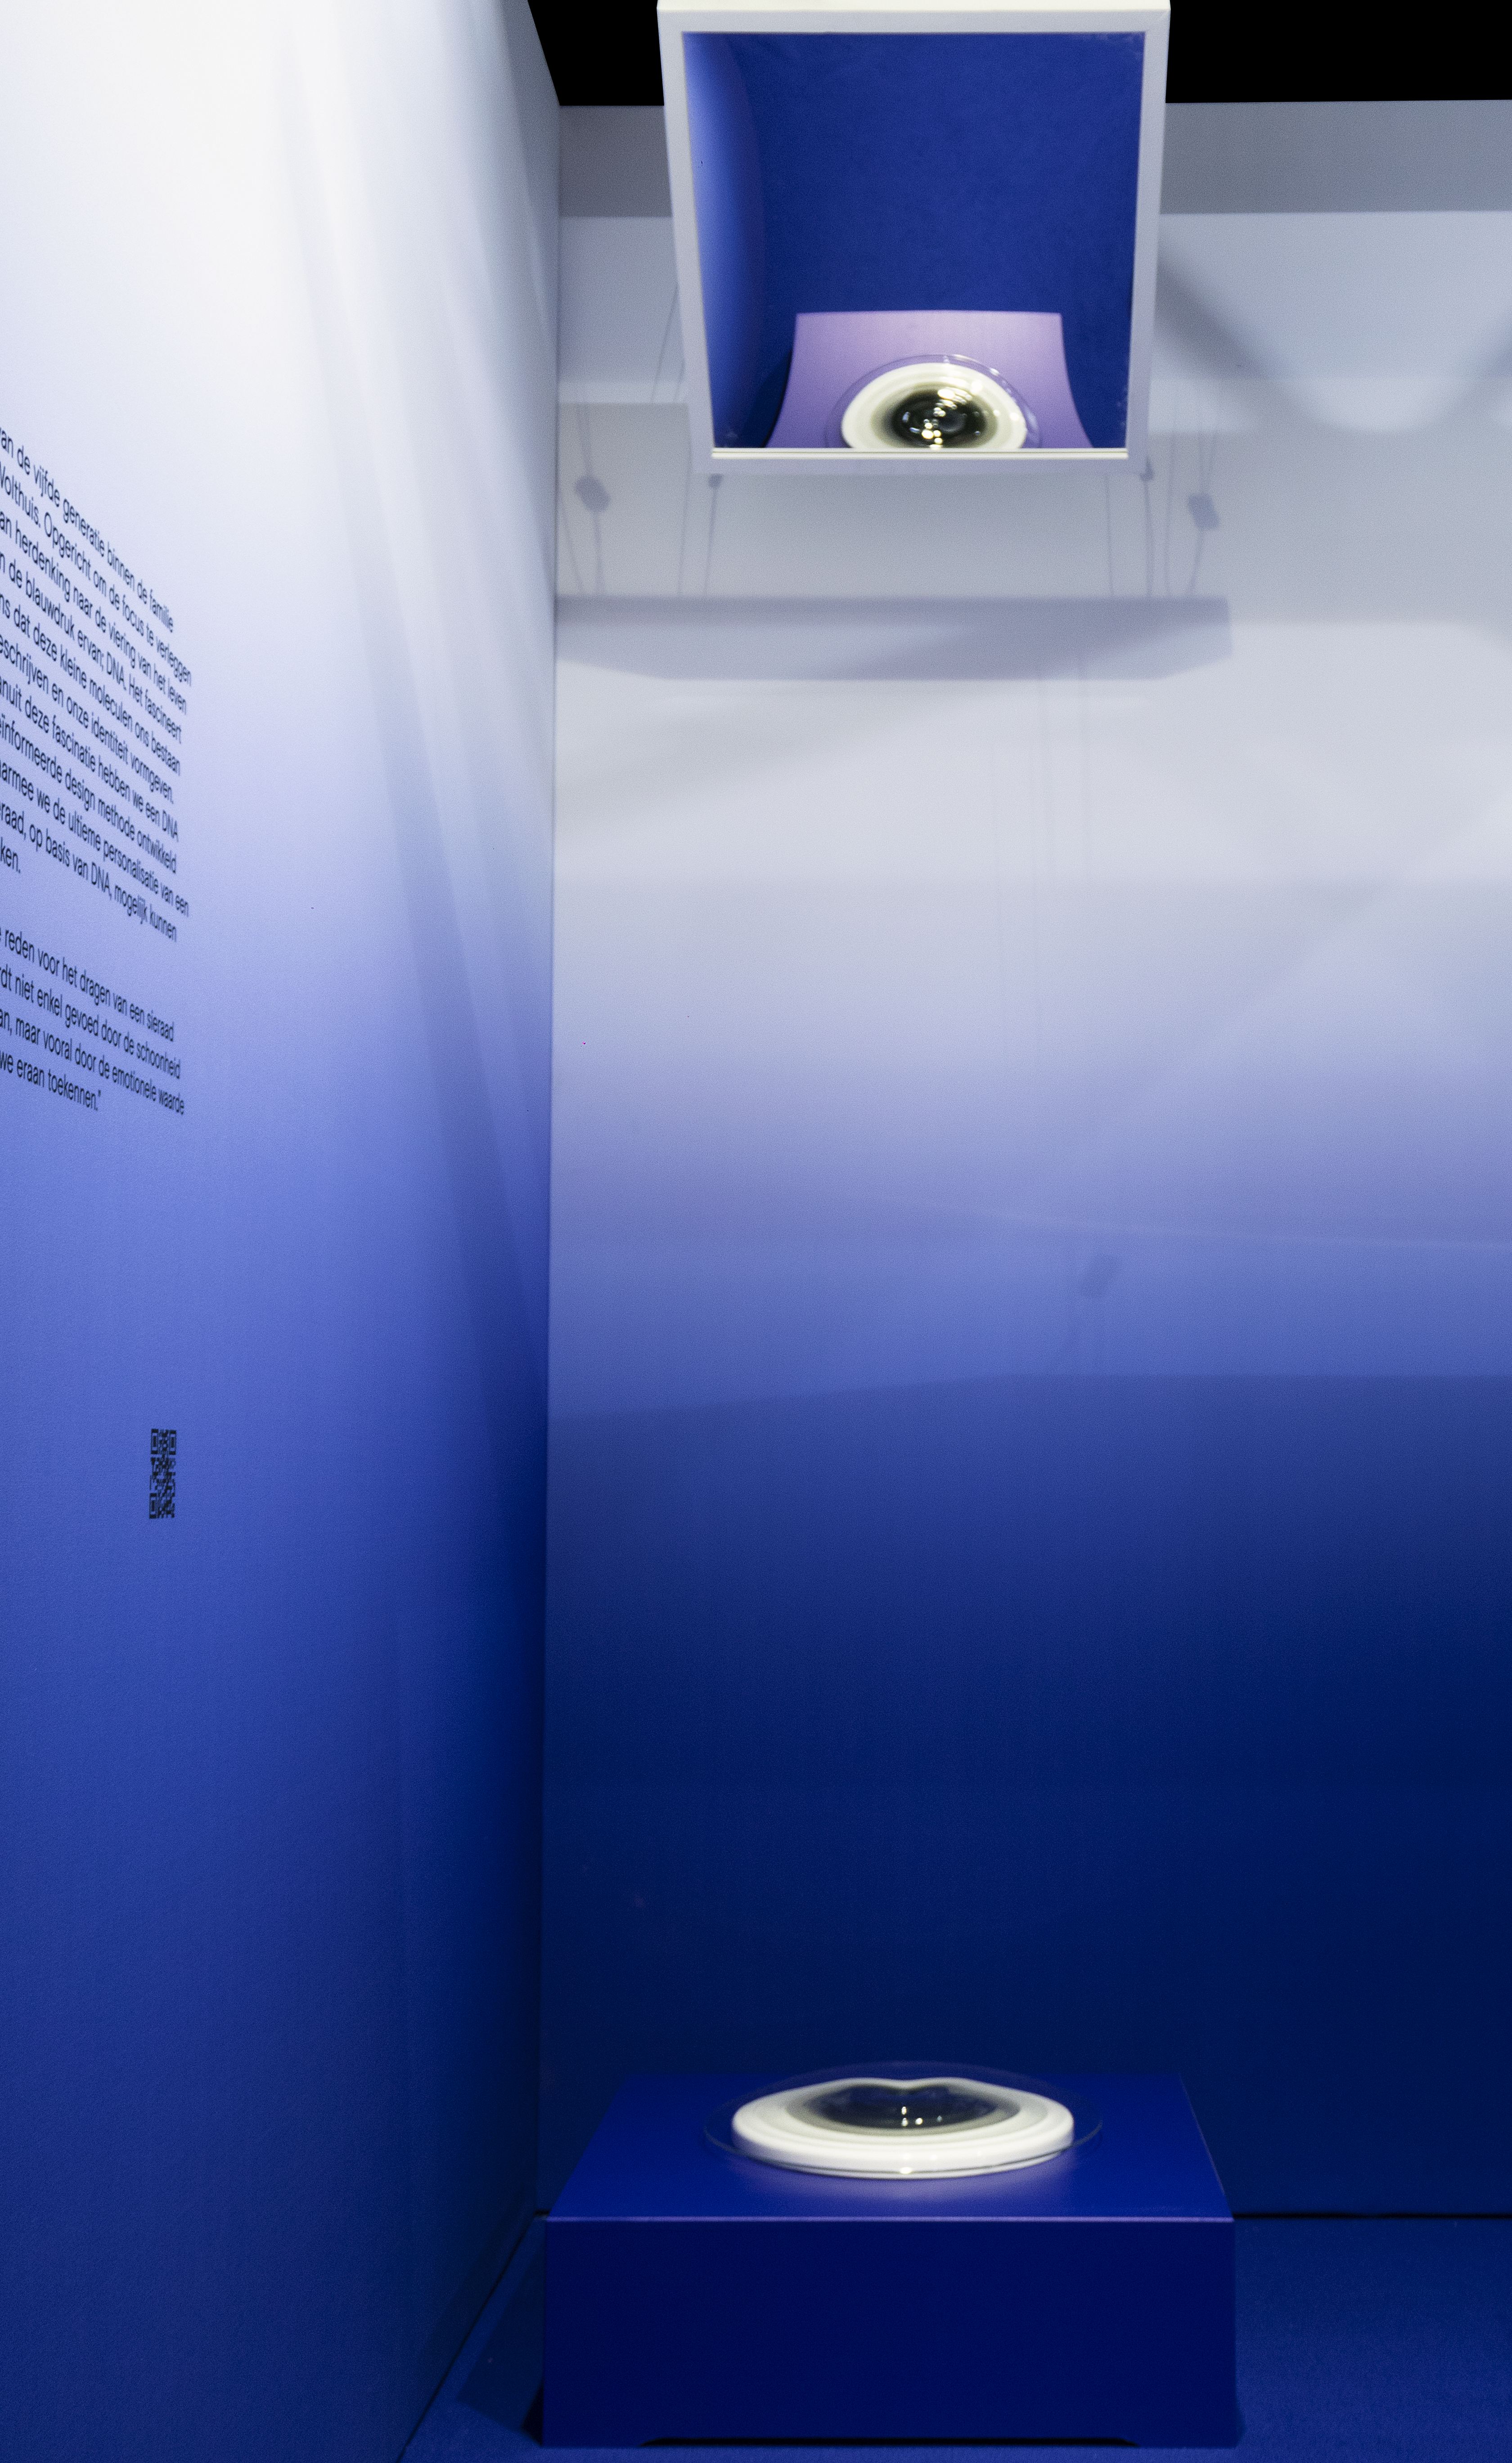 Installation design with an overal blue gradient and 3 suspended mirrors